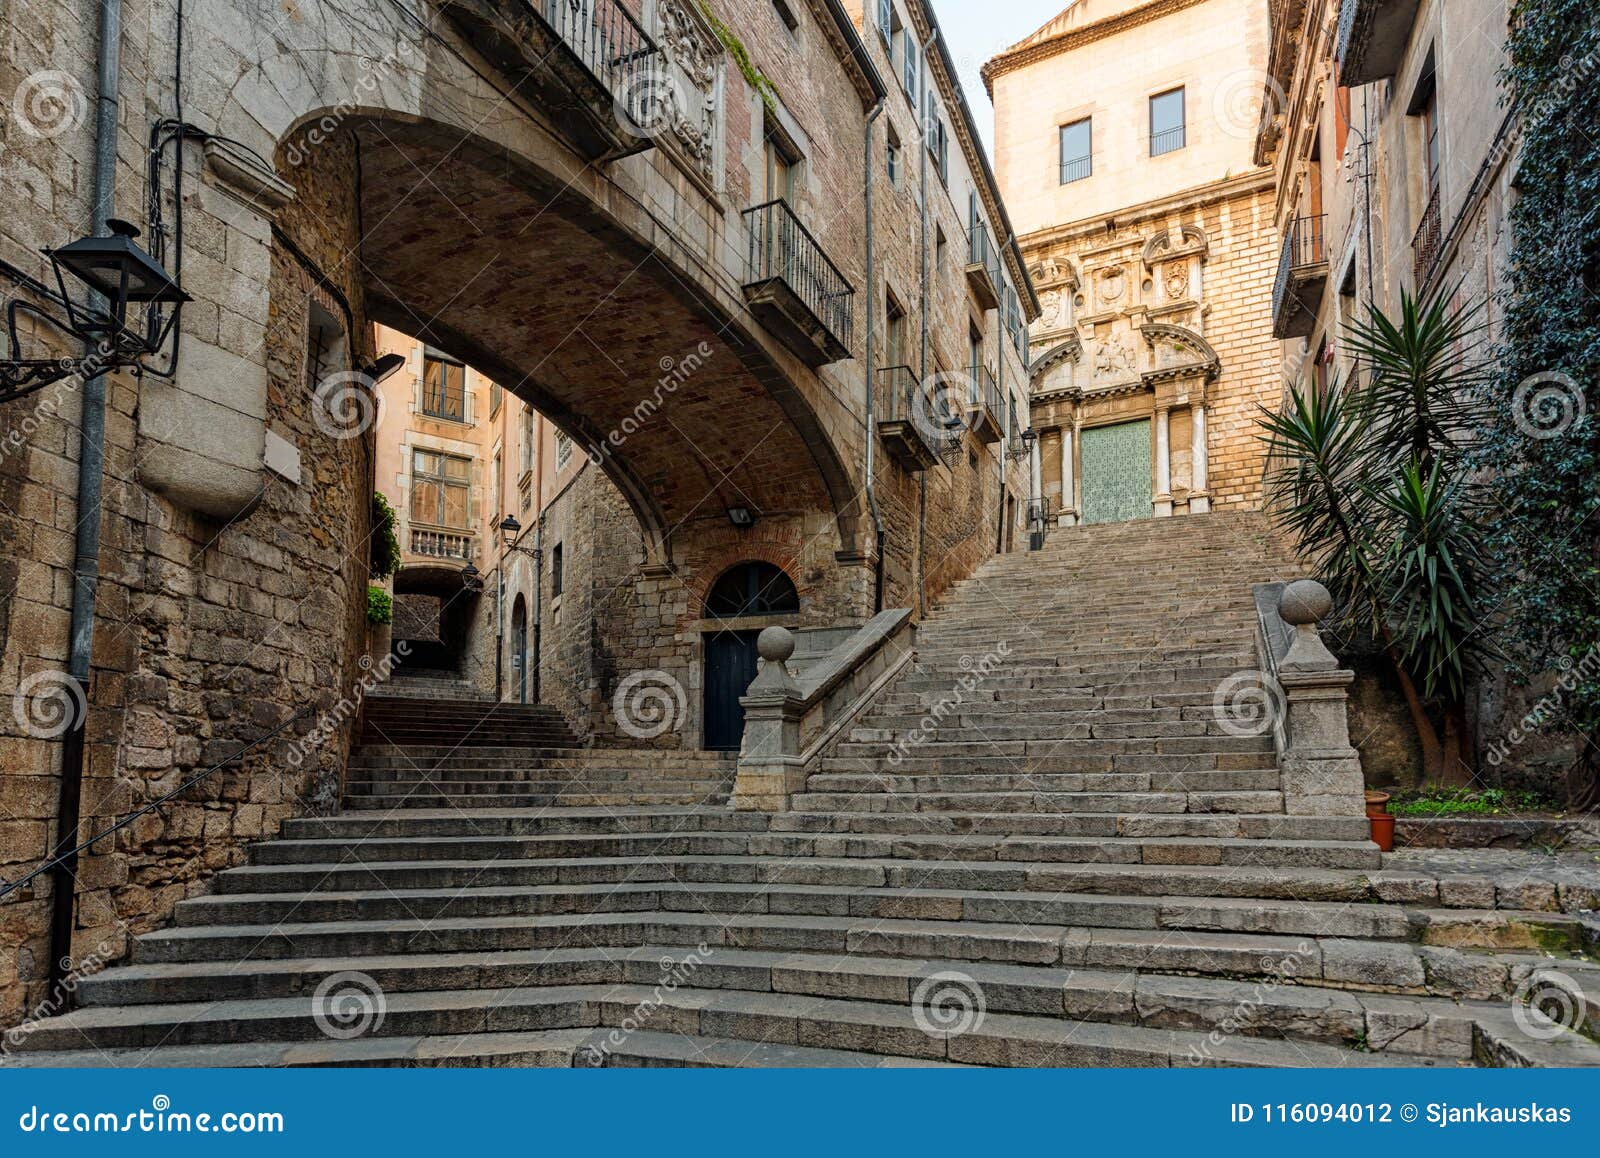 sant domenec stairs and arch of the agullana palace in girona